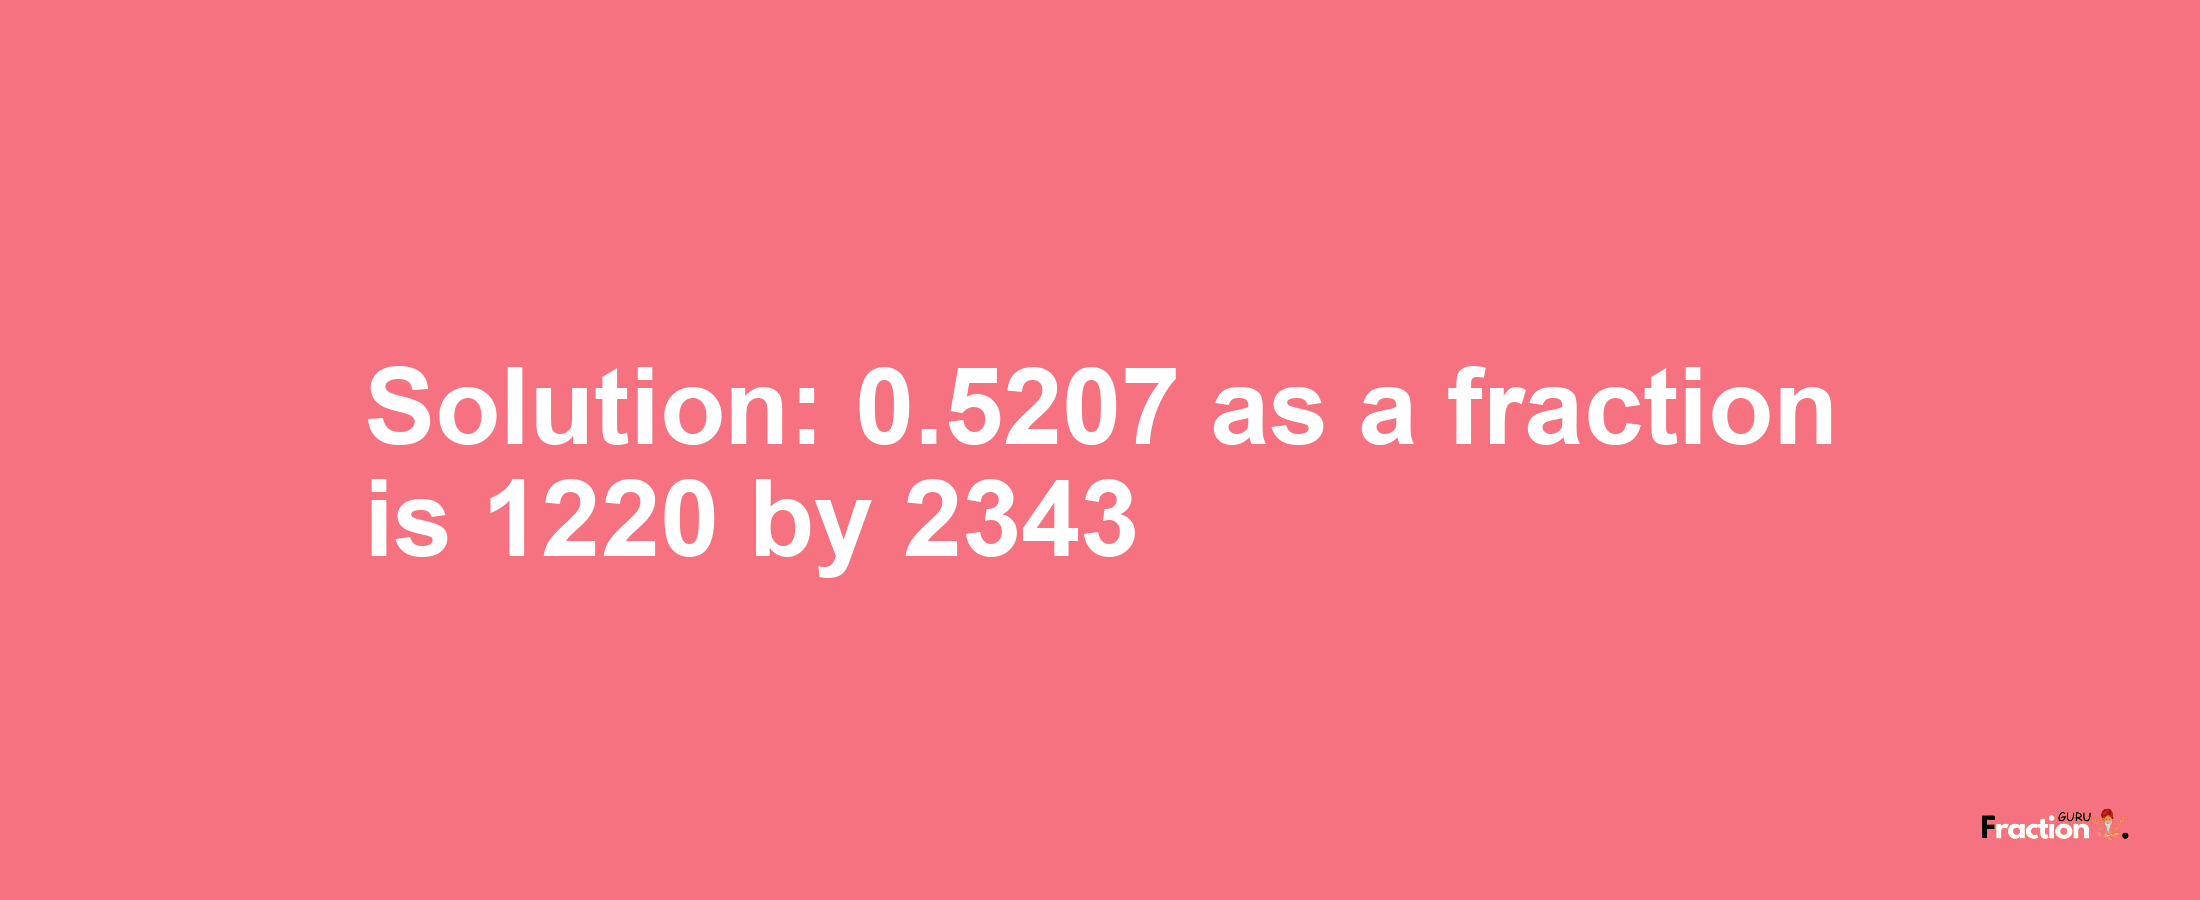 Solution:0.5207 as a fraction is 1220/2343